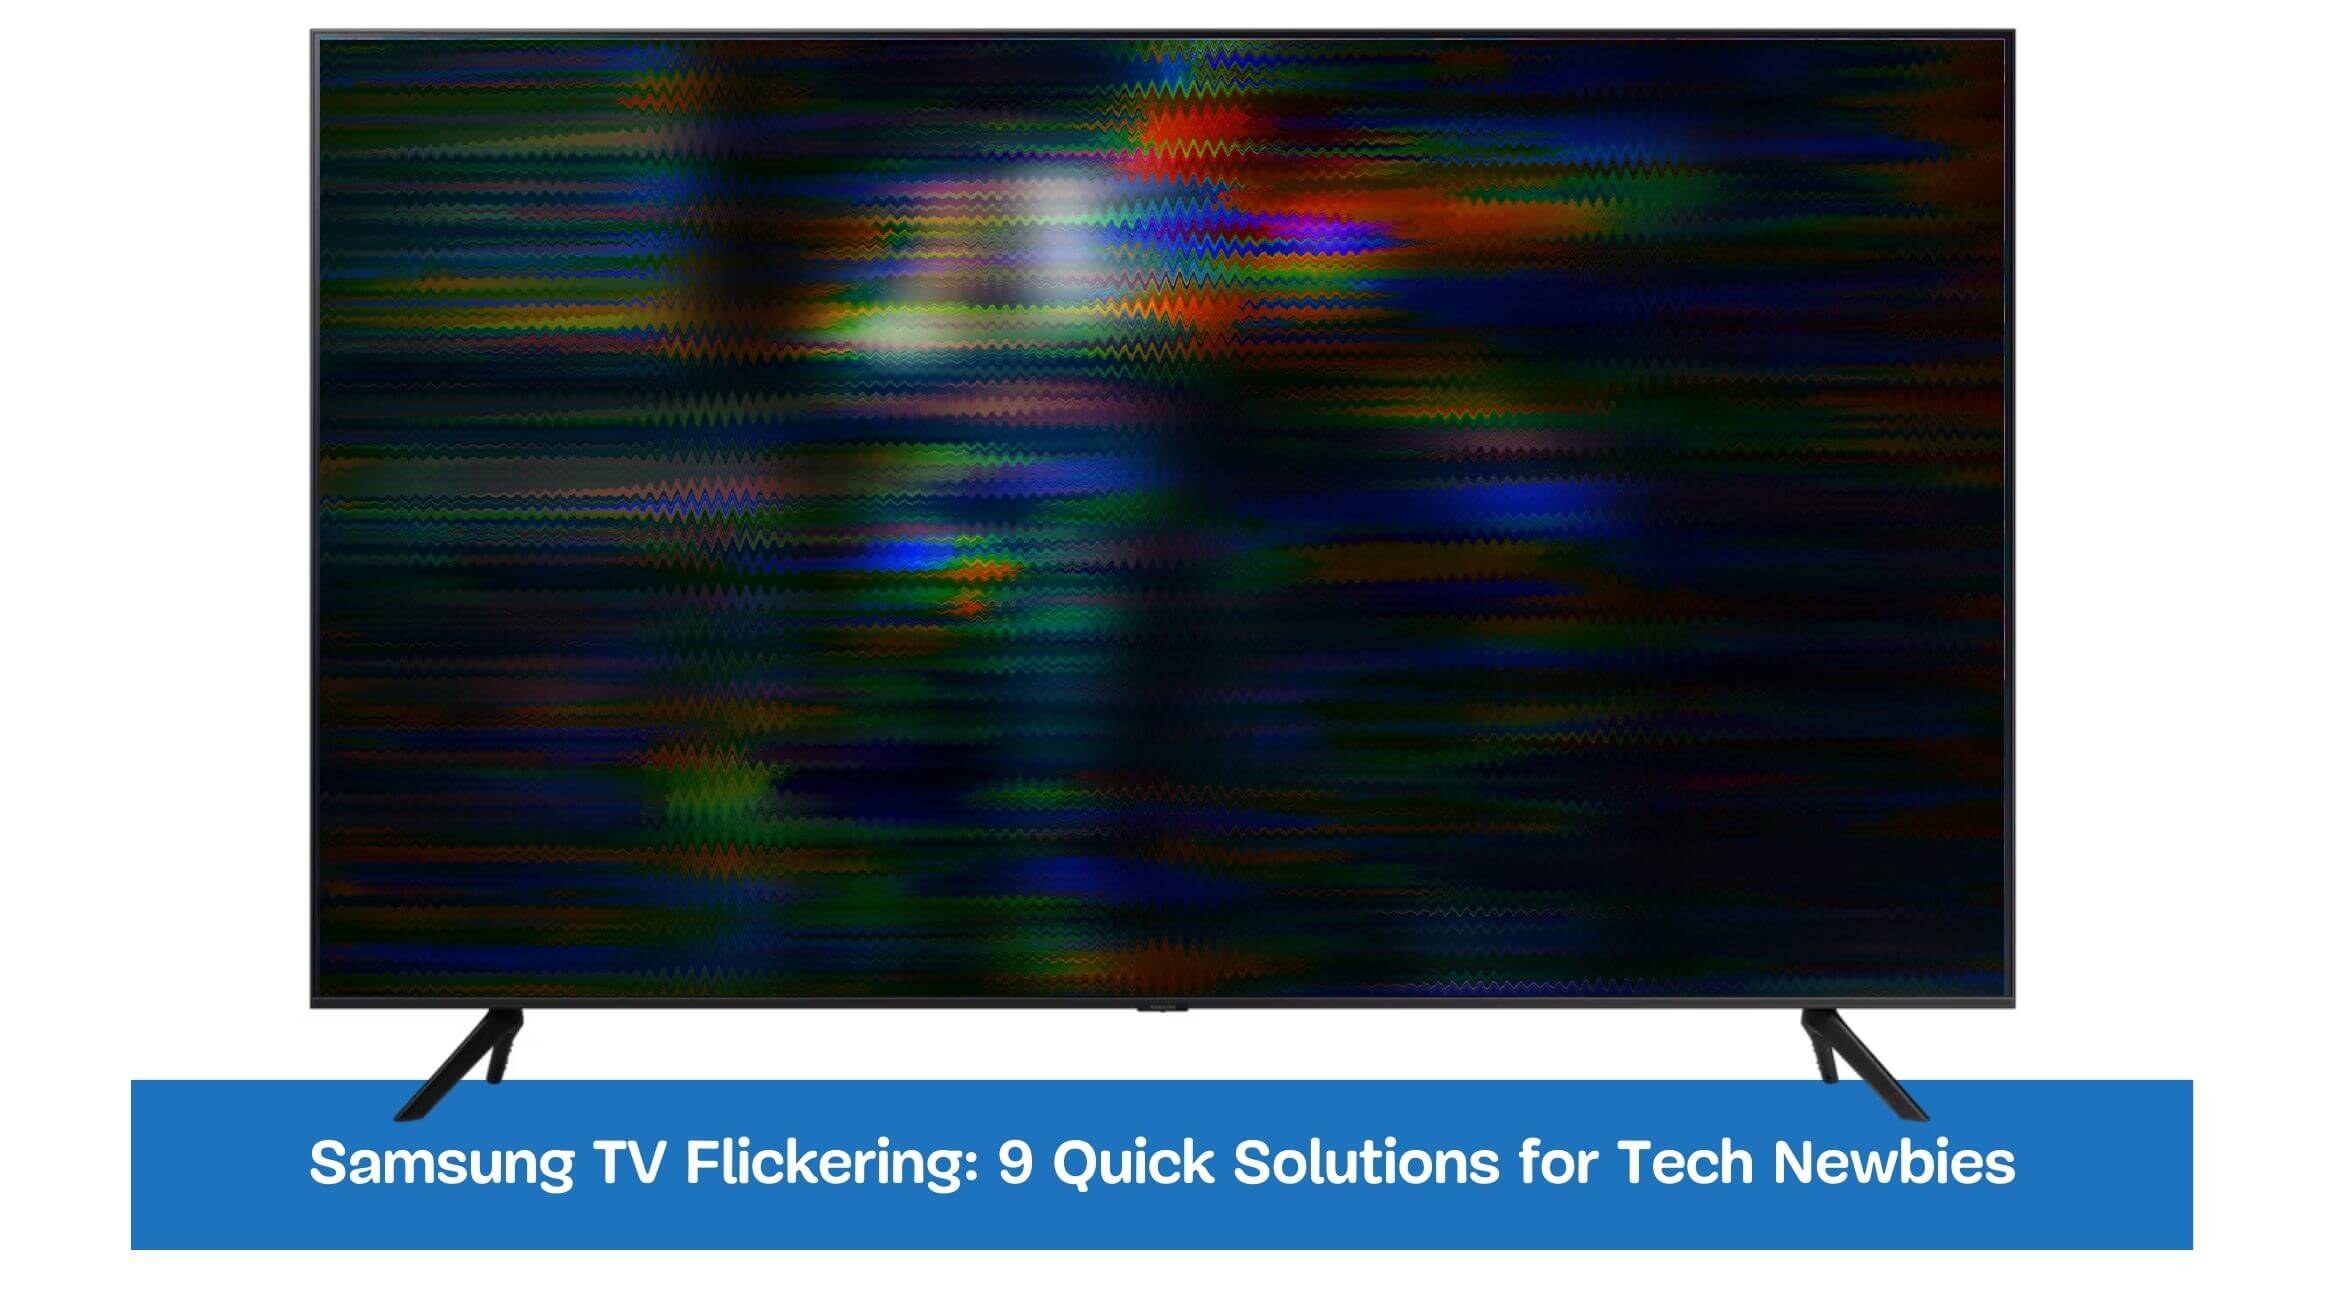 Samsung TV Flickering: 9 Quick Solutions for Tech Newbies